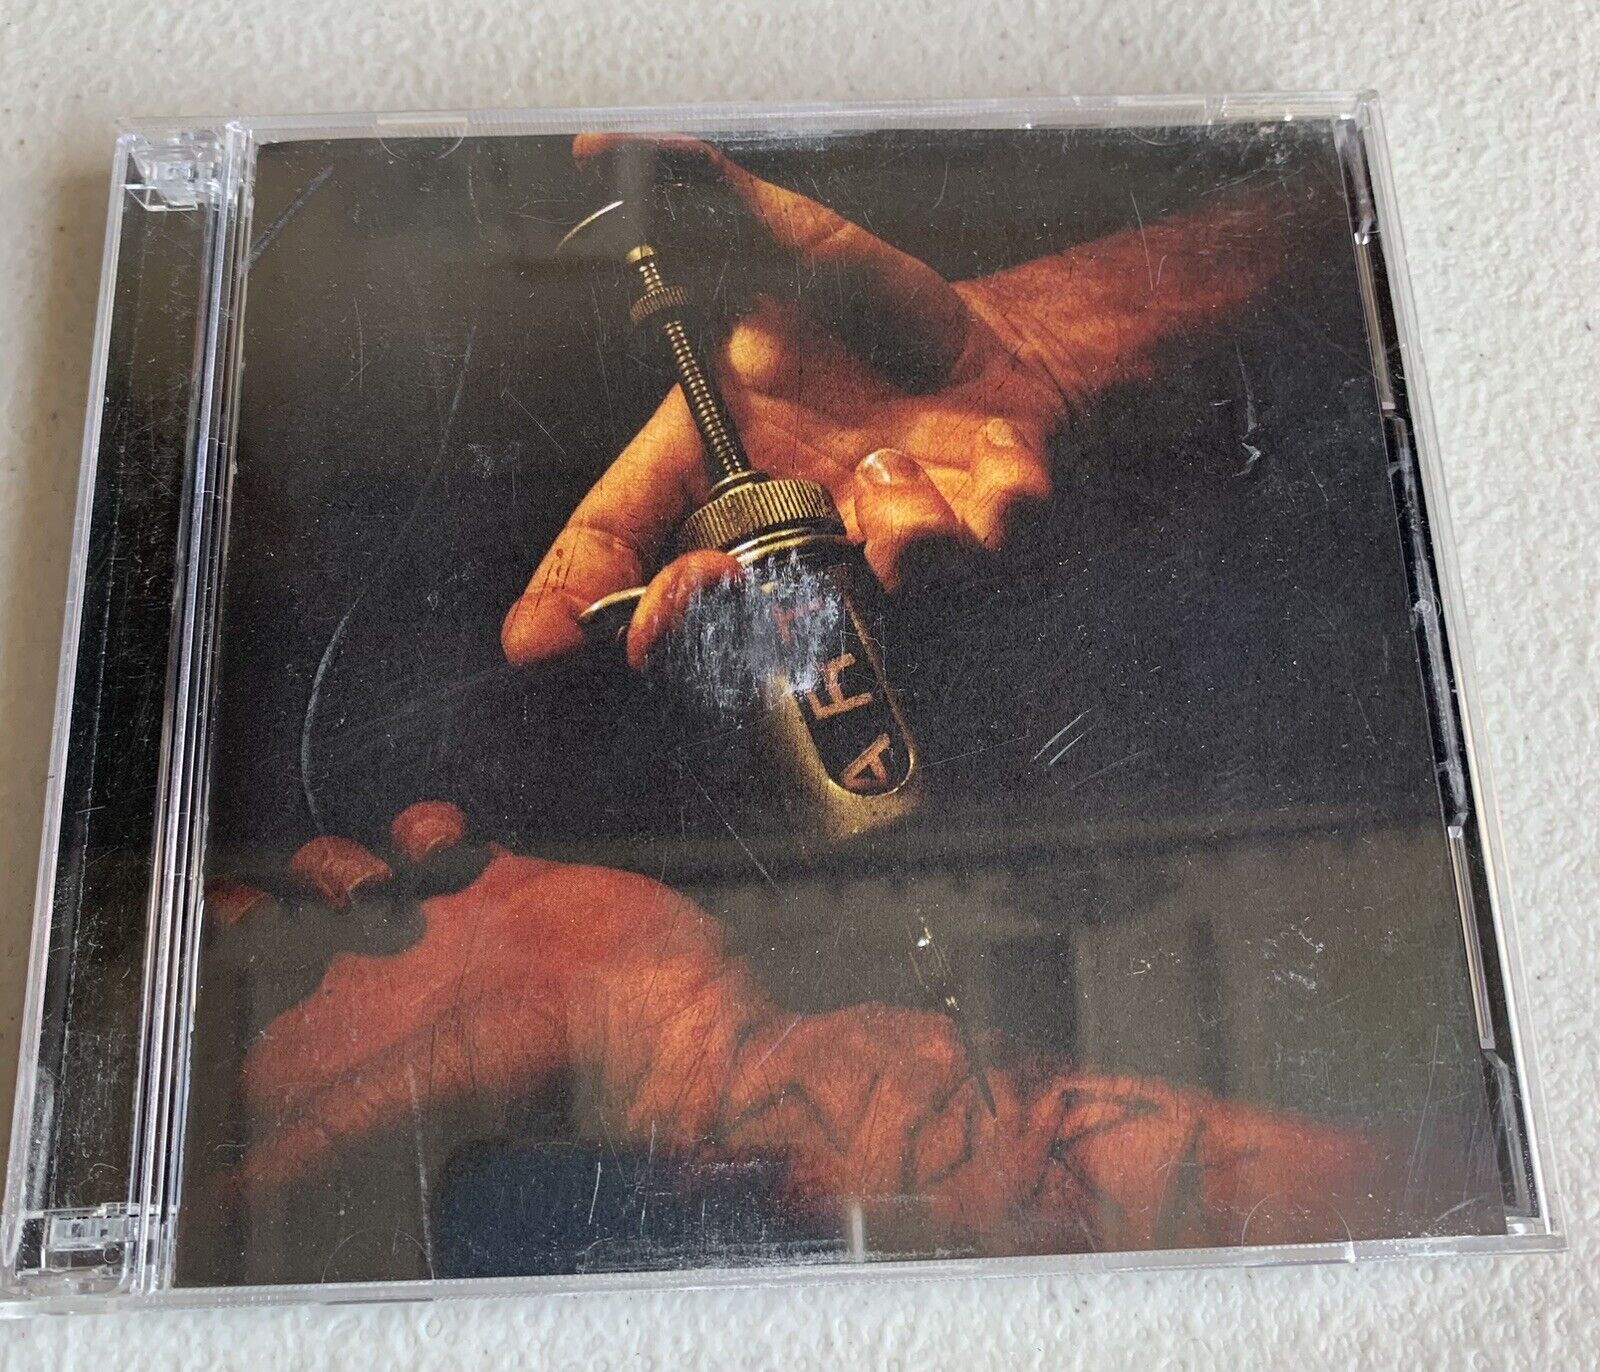 Artwork by The Used (CD, 2009)